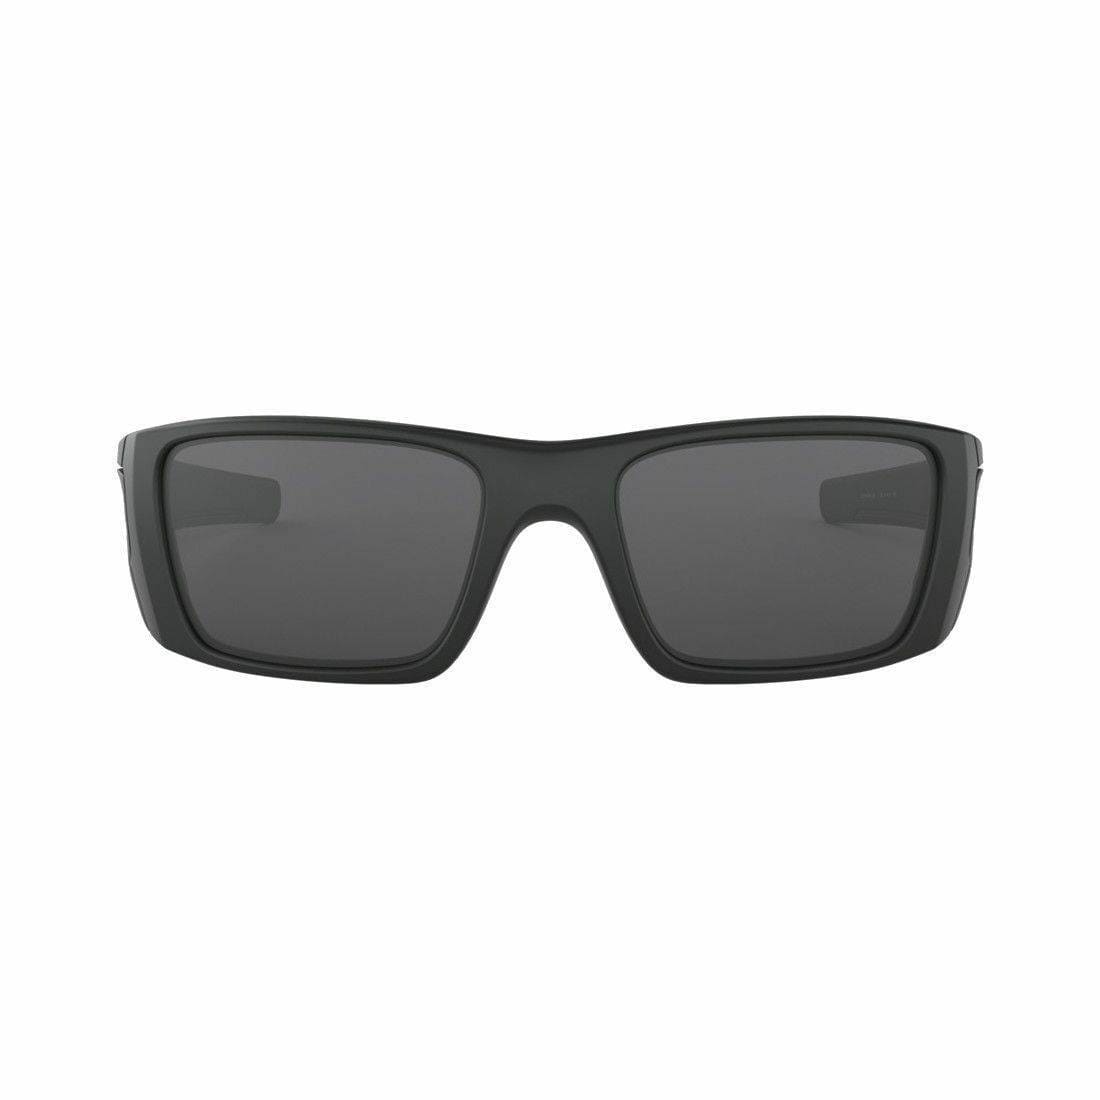 Oakley SI Fuel Cell Grey Wrap Men's Sunglasses OO9096 909638 60 - image 3 of 6